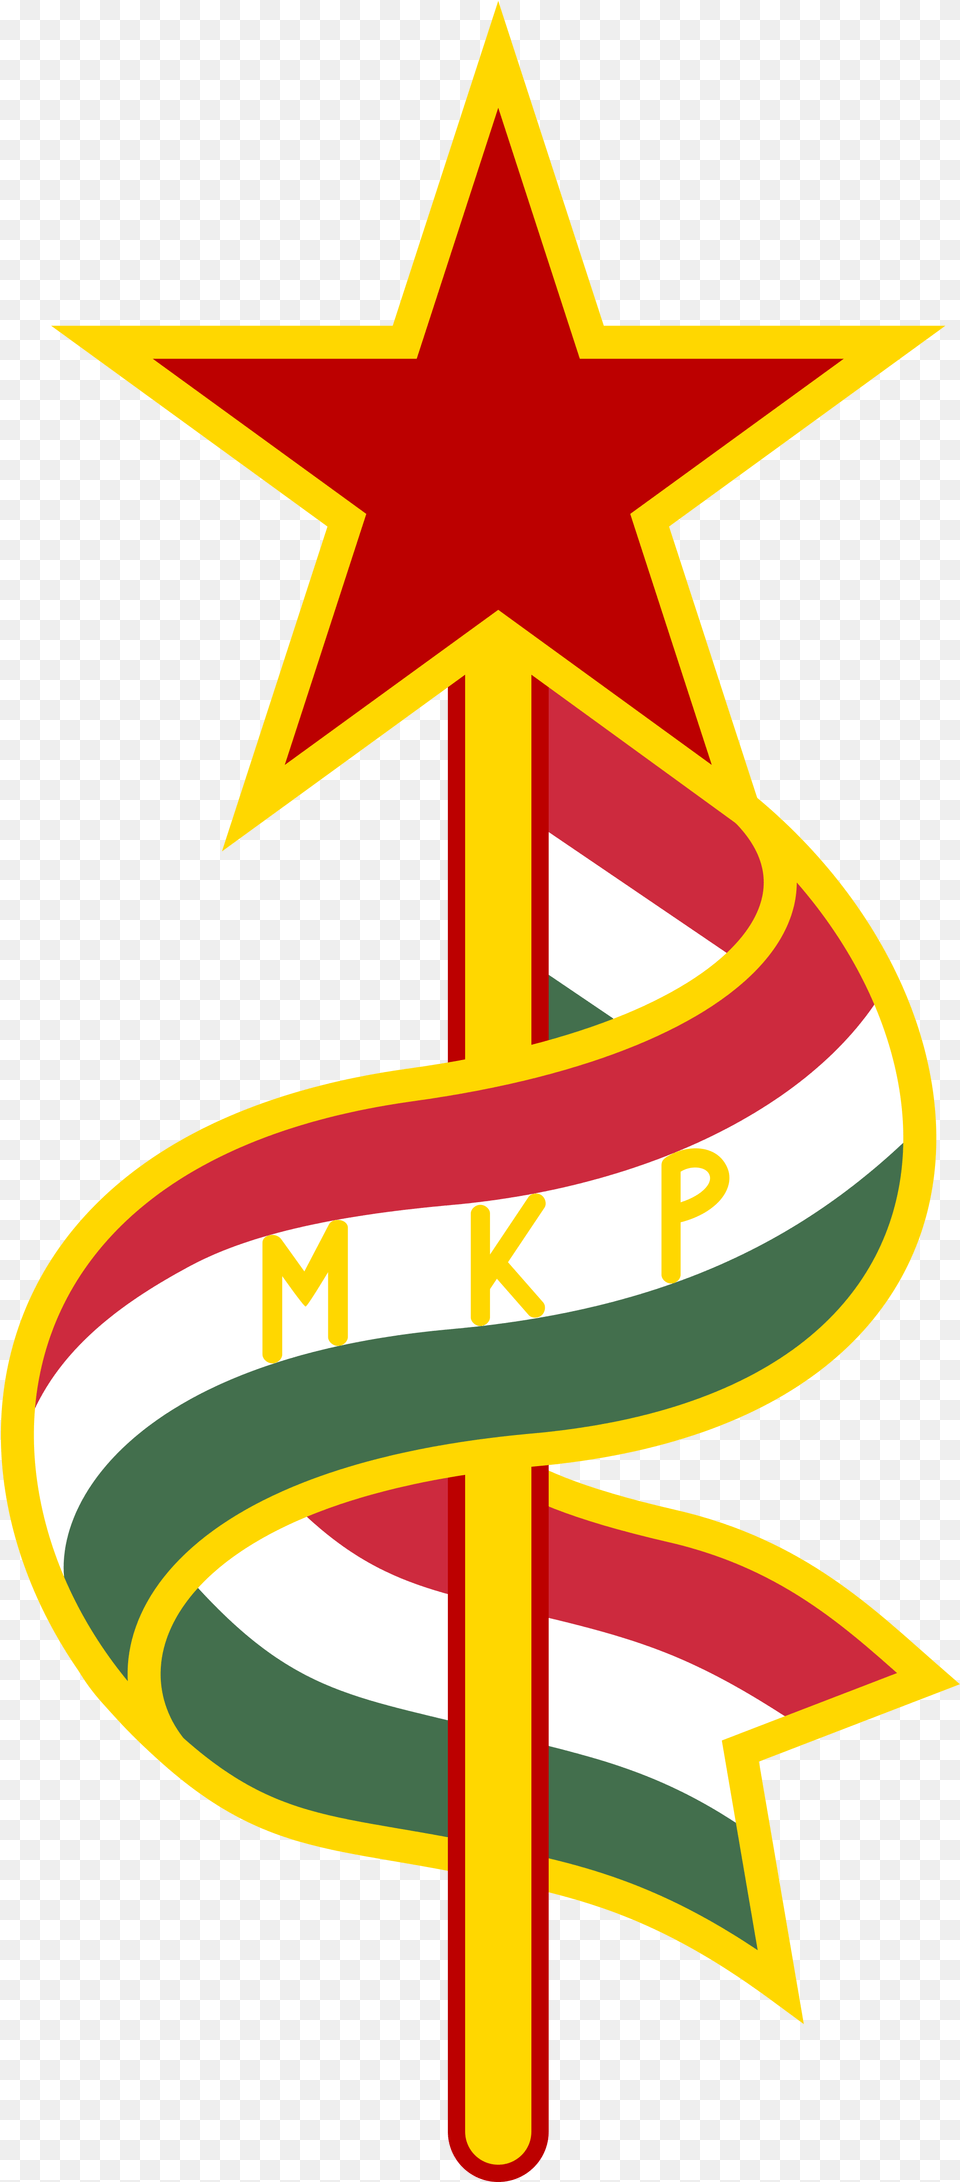 Logo Of The Hungarian Communist Party, Star Symbol, Symbol, Cross Png Image